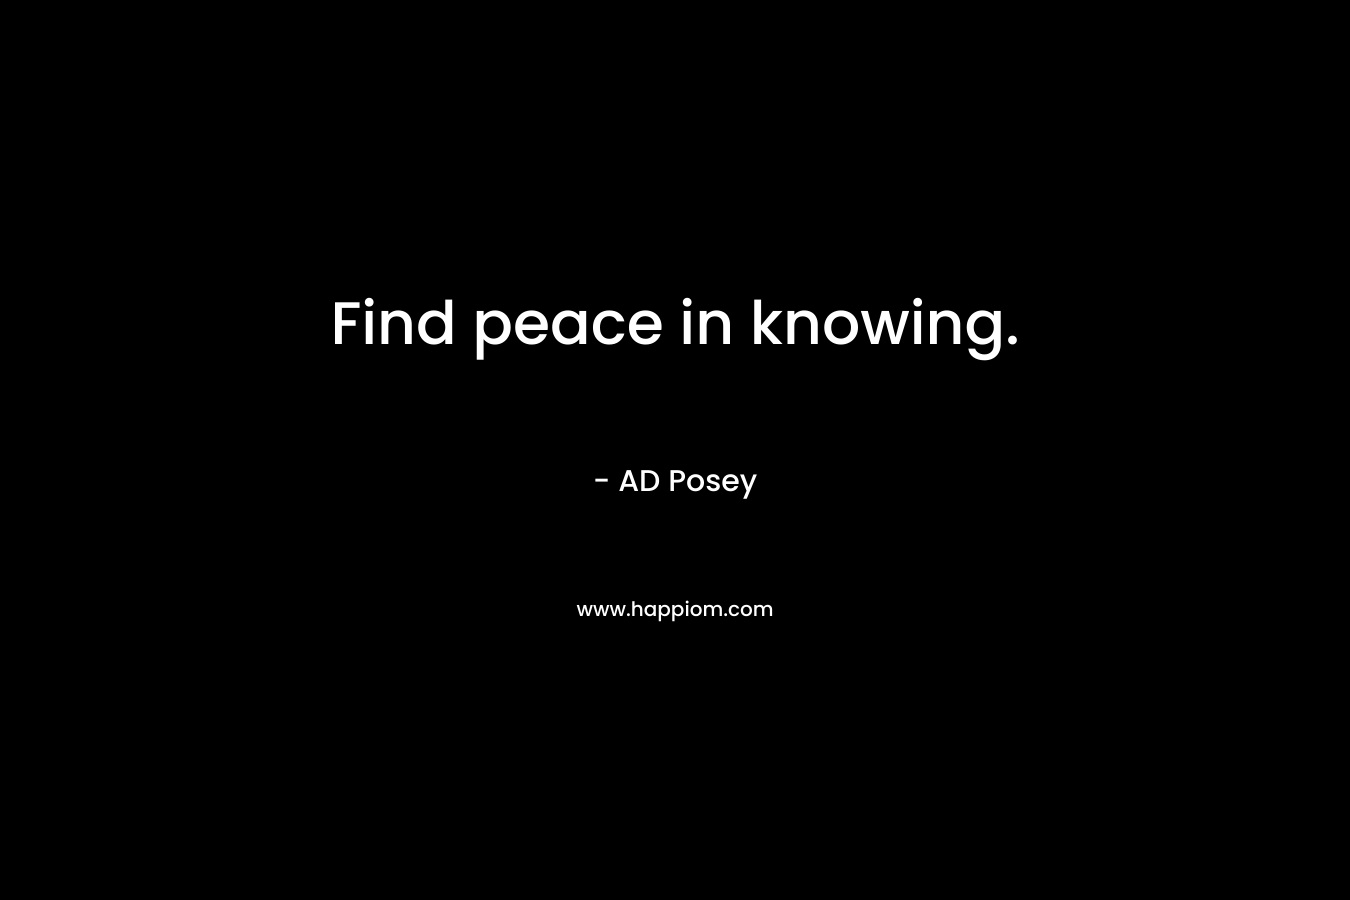 Find peace in knowing.